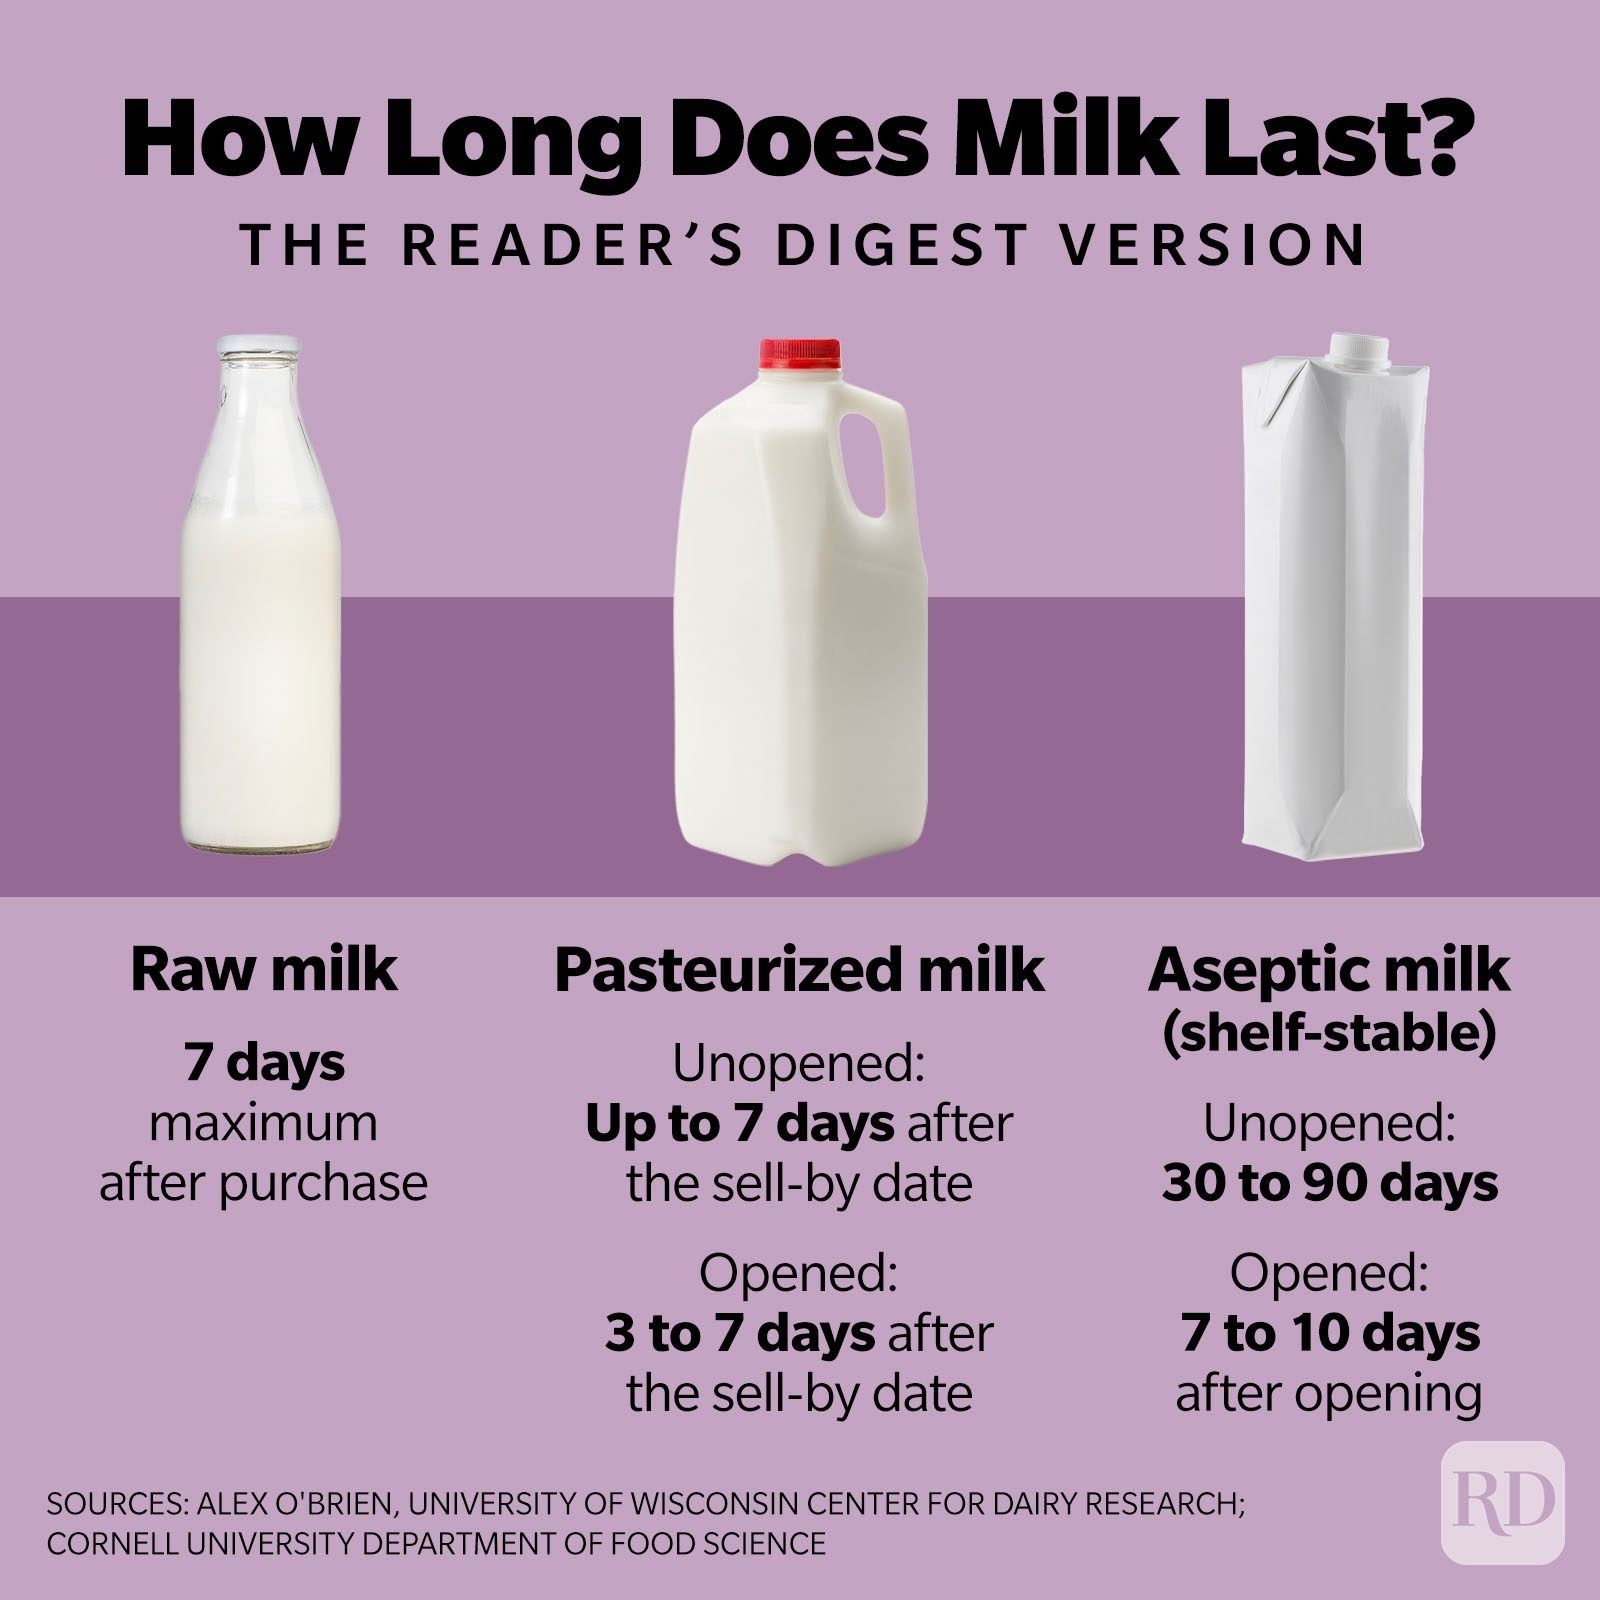 https://www.rd.com/wp-content/uploads/2021/09/How-Long-Does-Milk-Last-Infographic-GettyImages-3_v2.jpg?fit=680%2C680